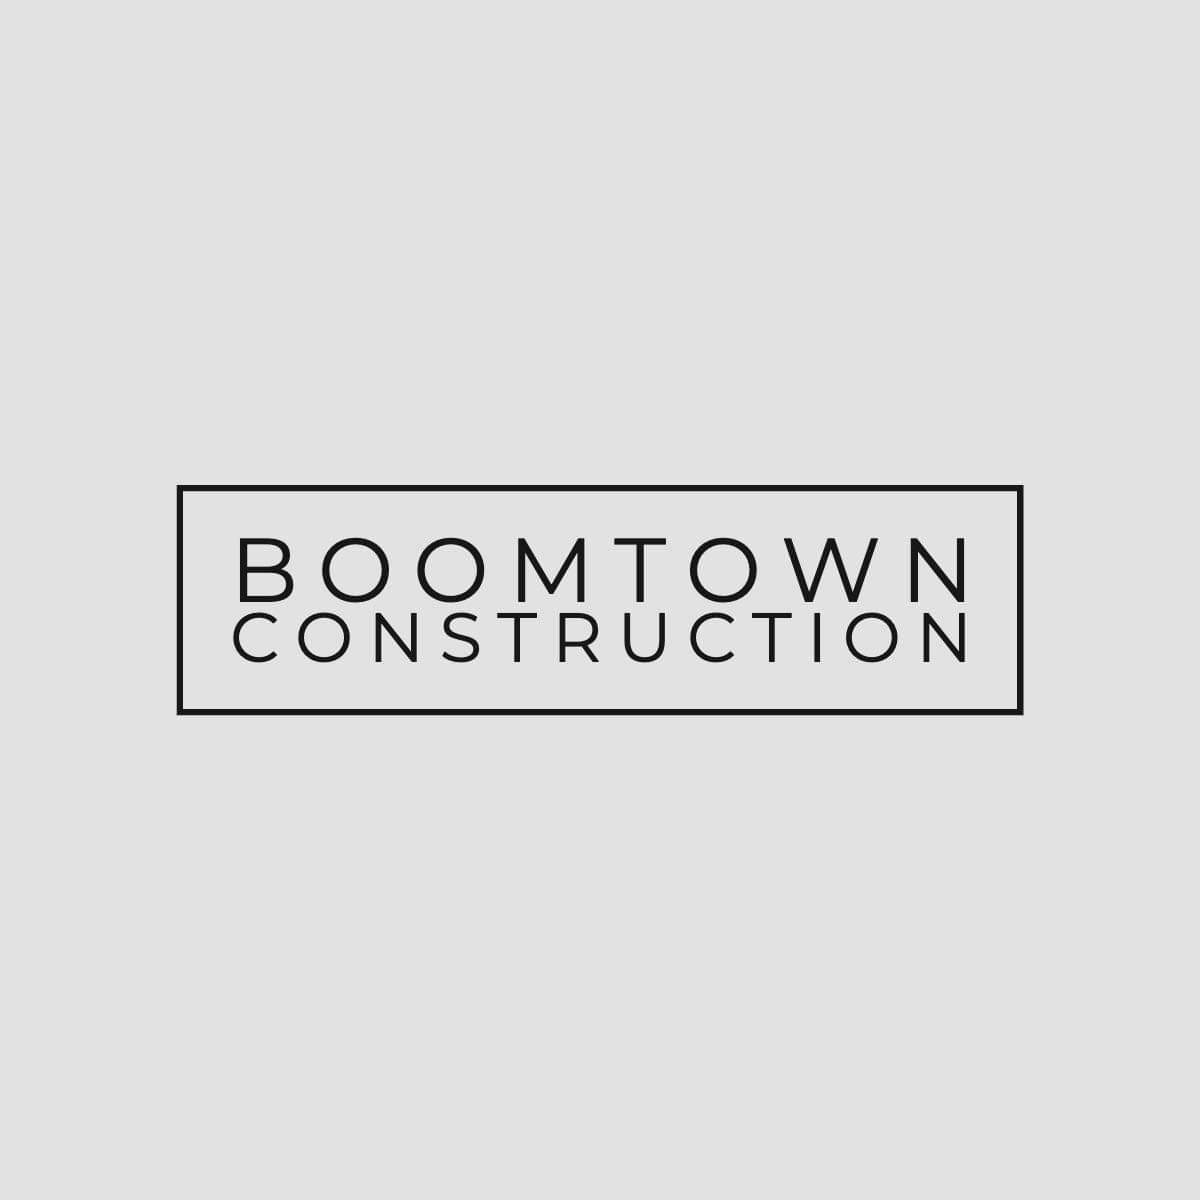 Boomtown Construction - Rossville, GA - (423)497-3264 | ShowMeLocal.com